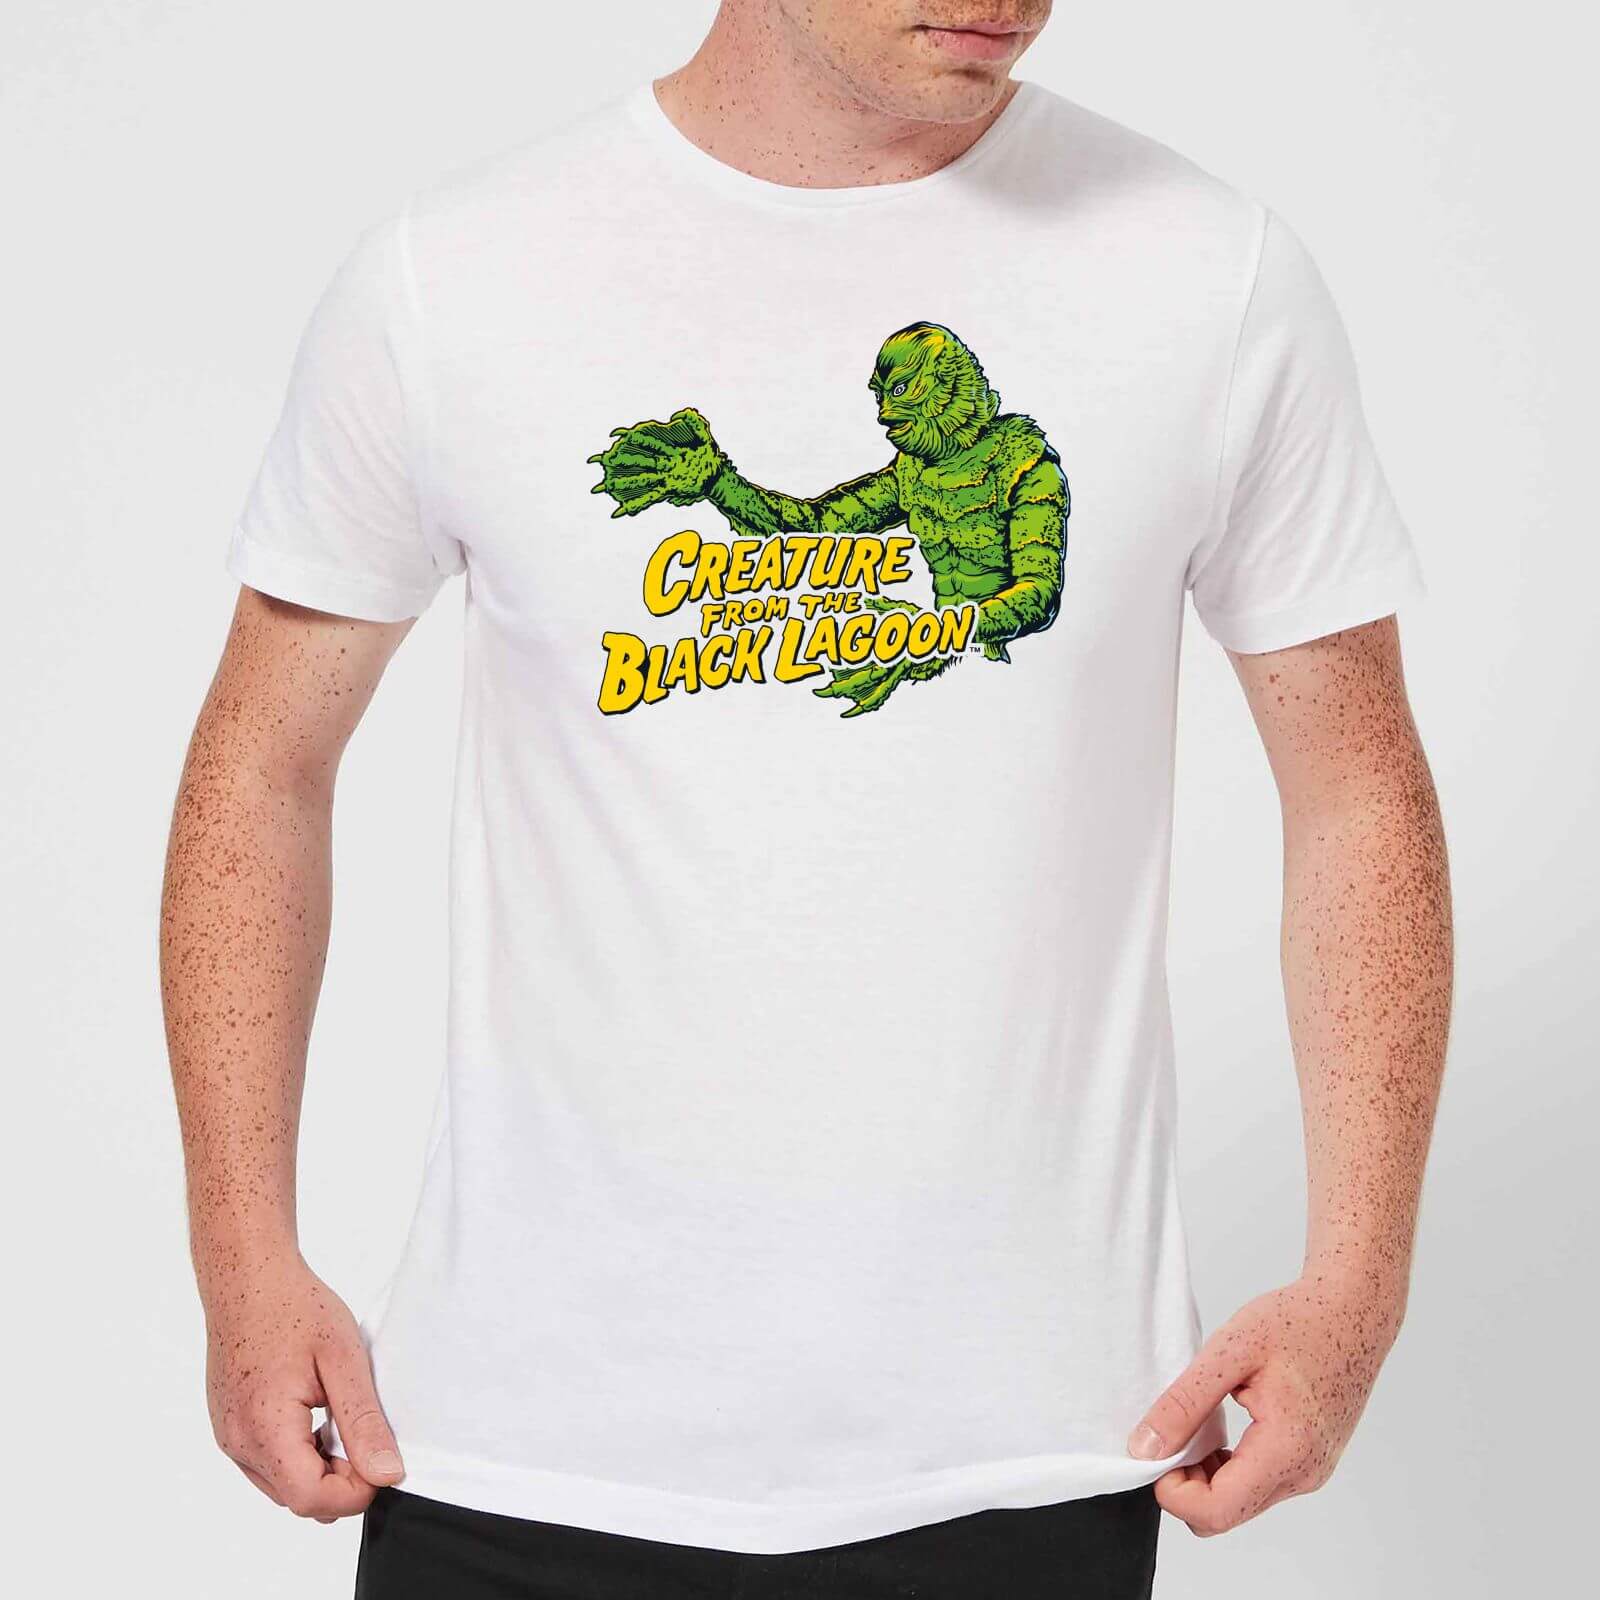 Universal Monsters Creature From The Black Lagoon Crest Men's T-Shirt - White - XS - White